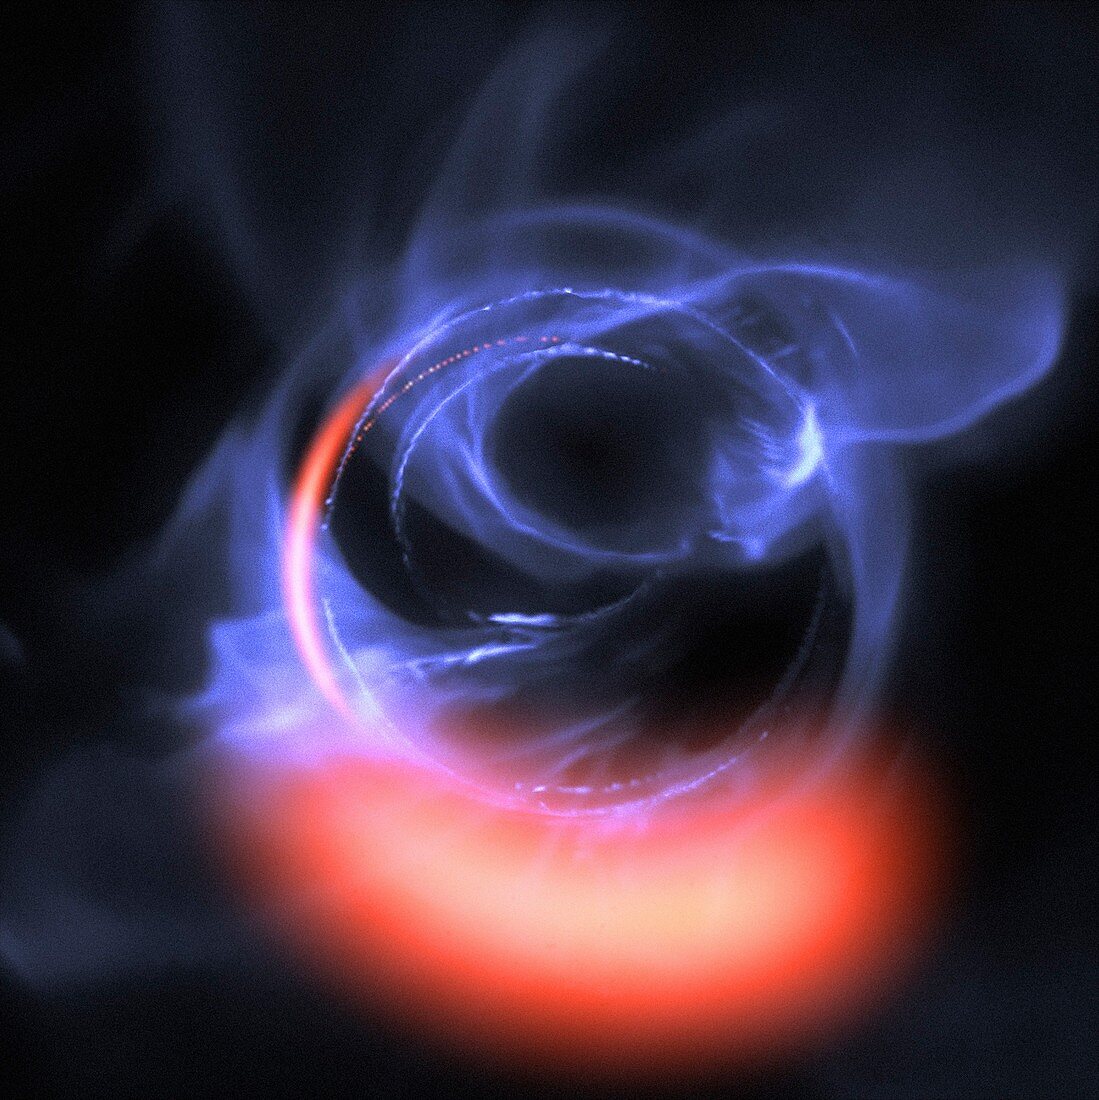 Material orbiting close to a black hole, illustration